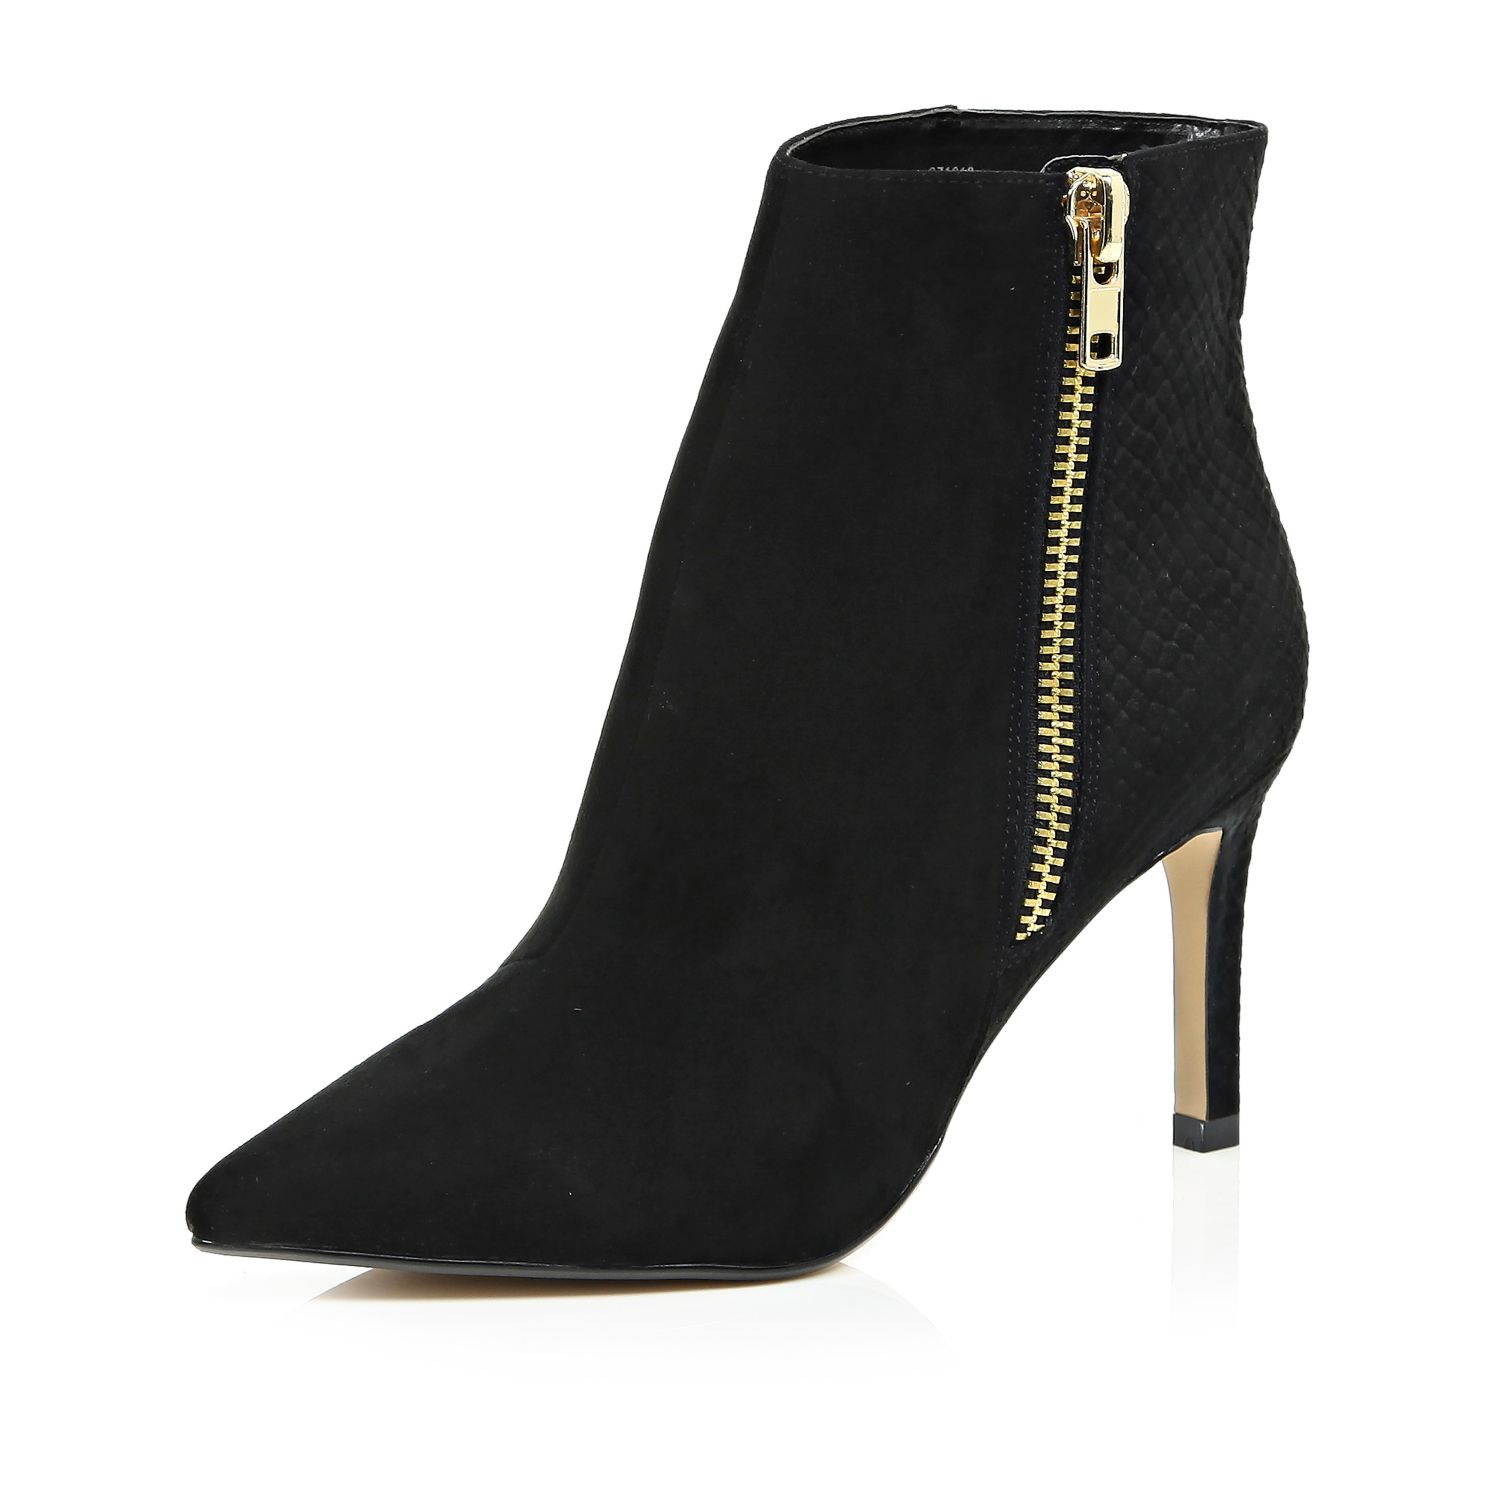 River Island Black Pointed Toe Zip Trim Heeled Ankle Boots In Black Lyst